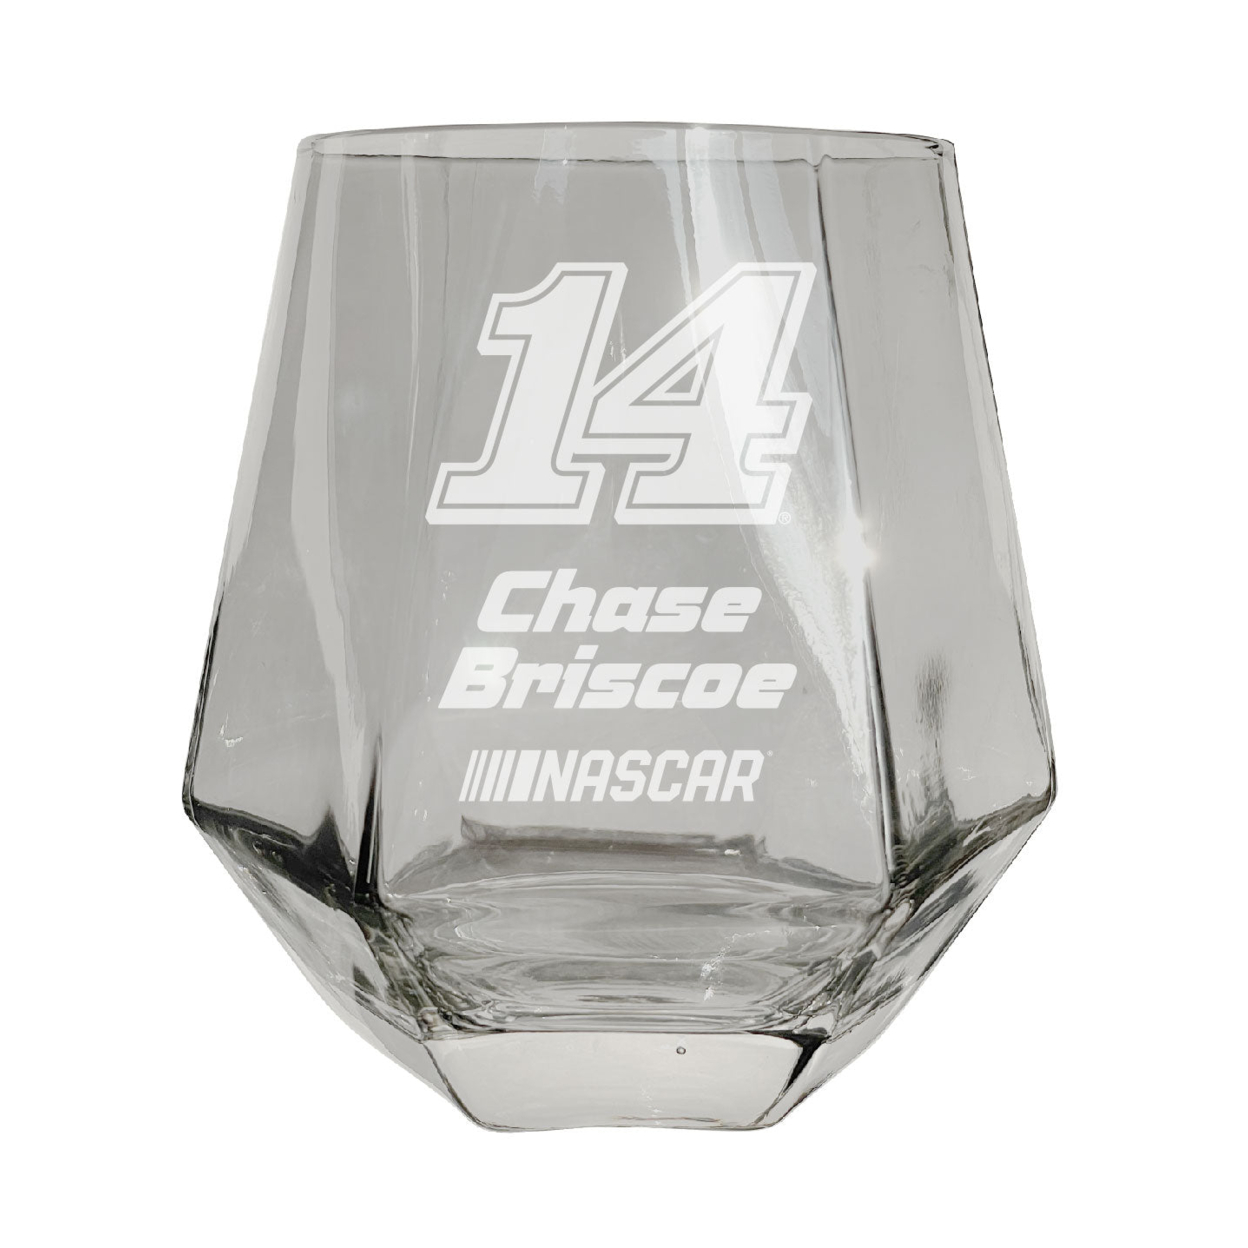 #14 Chase Briscoe Officially Licensed 10 Oz Engraved Diamond Wine Glass - Clear, Single